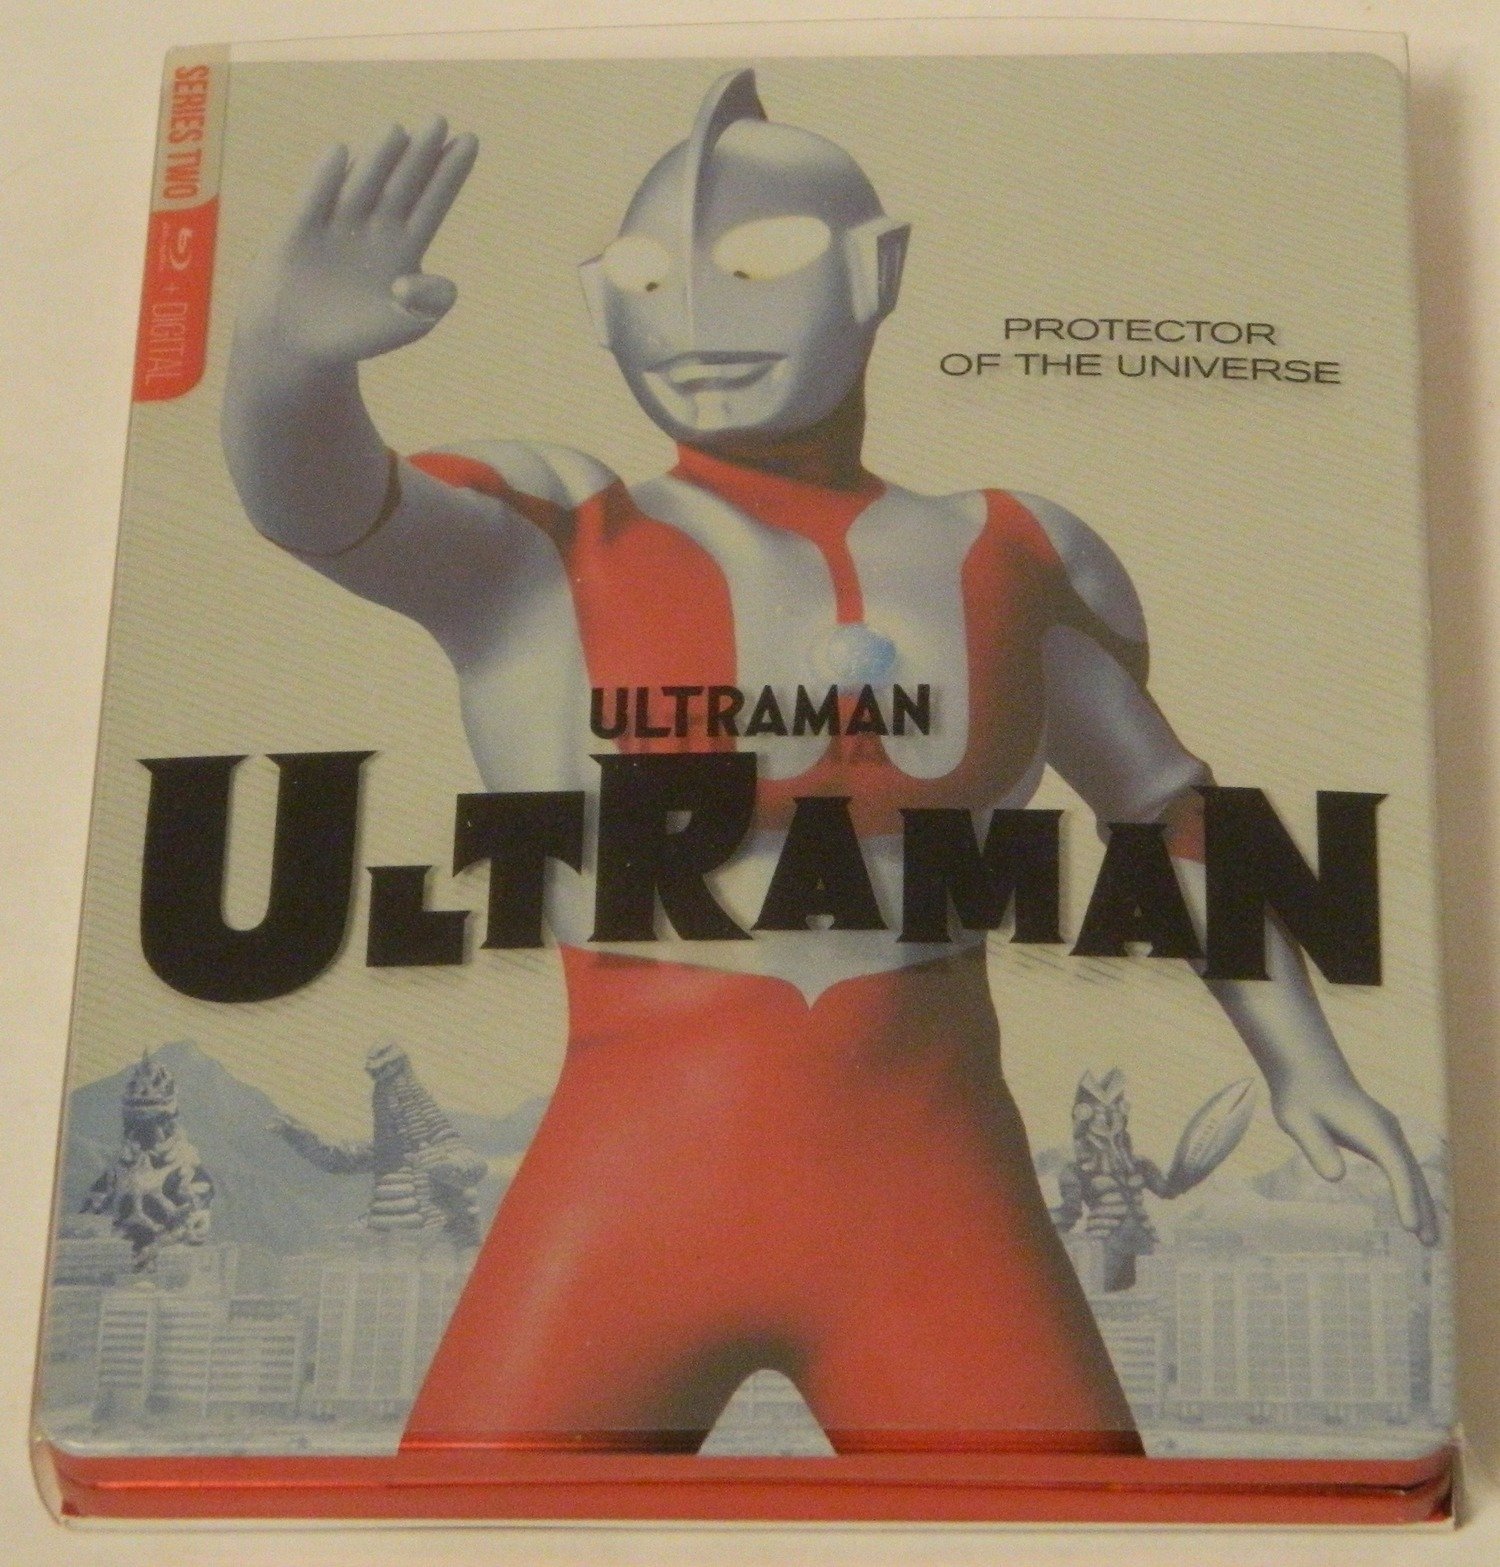 Ultraman: The Complete Series – SteelBook Edition Blu-ray Review